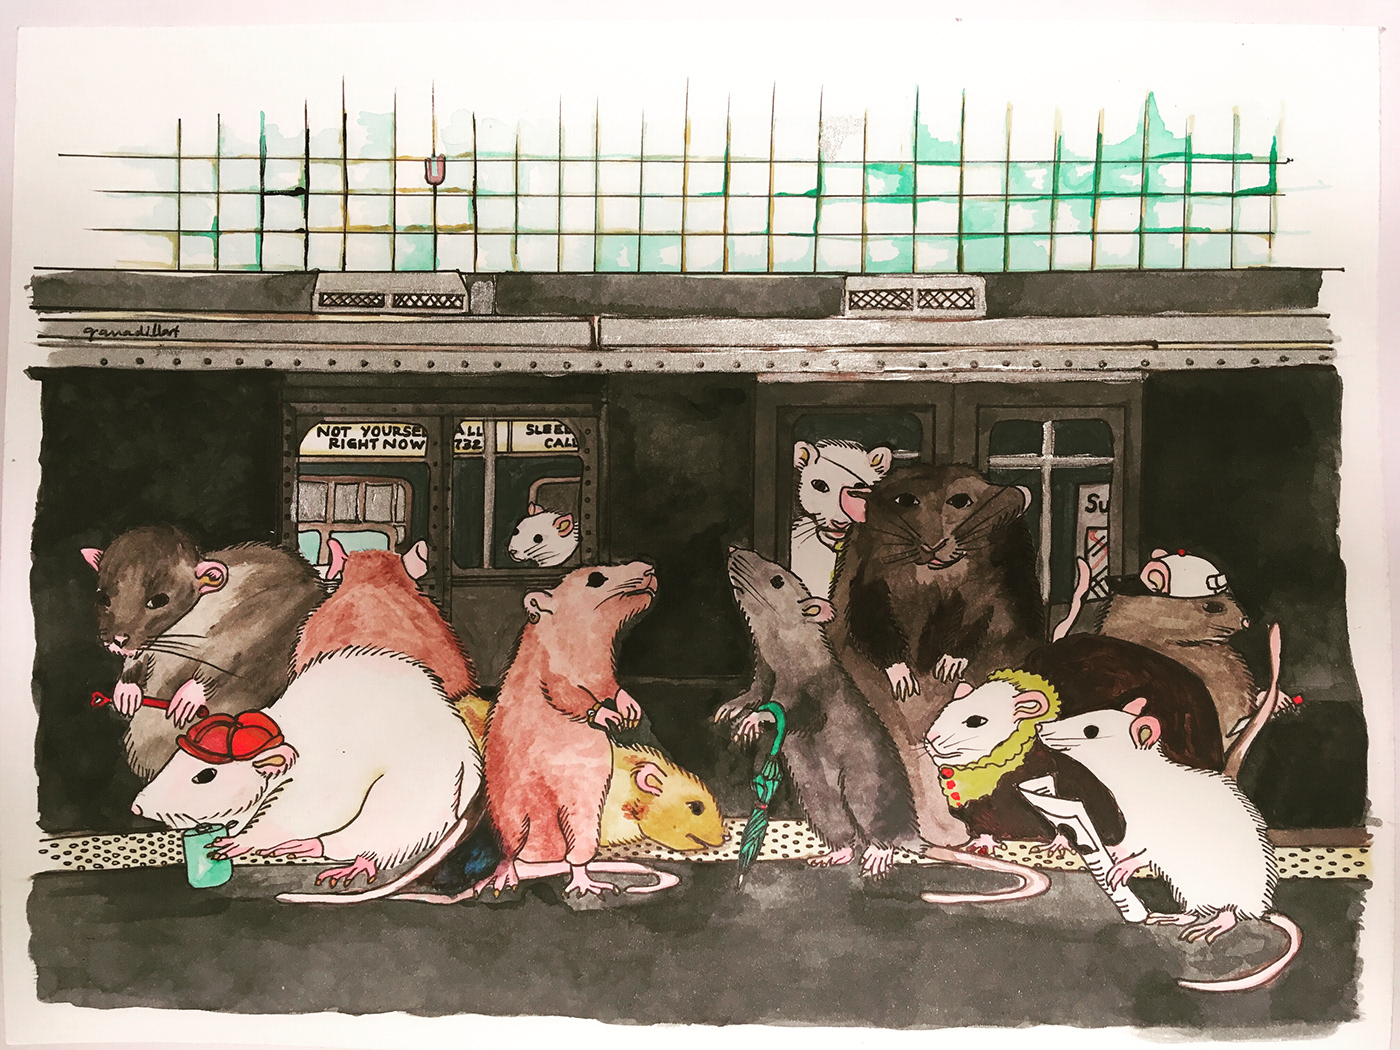 art ILLUSTRATION  Behance artist Drawing  FINEART society reality think color acrylic ink paint Rats subway society